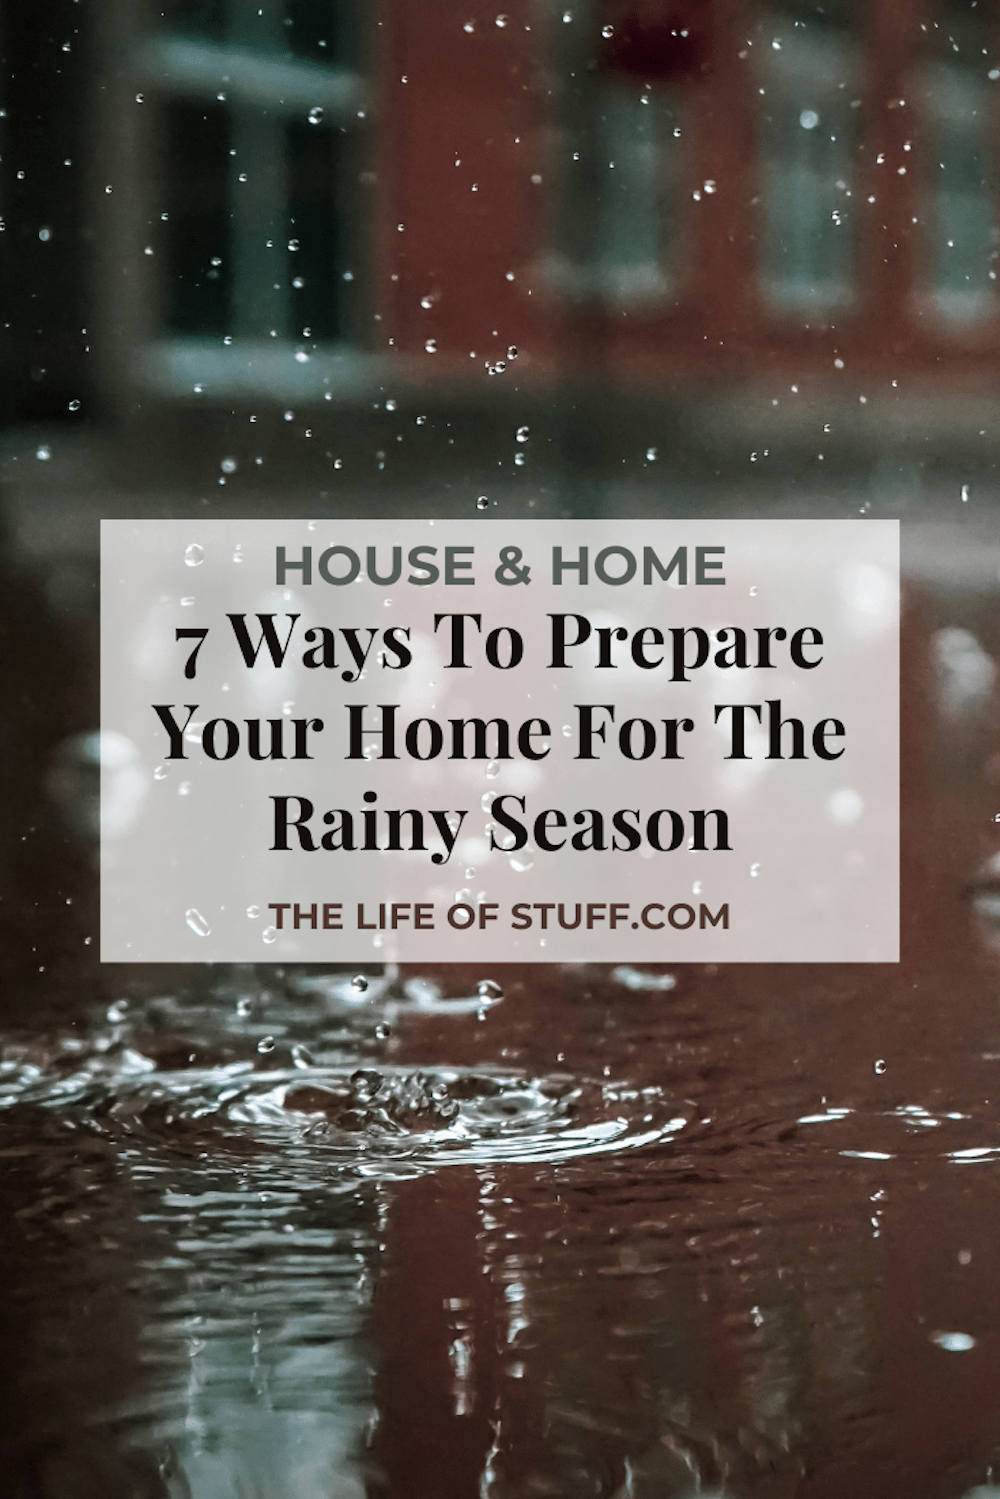 7 Ways To Prepare Your Home For The Rainy Season - The Life of Stuff